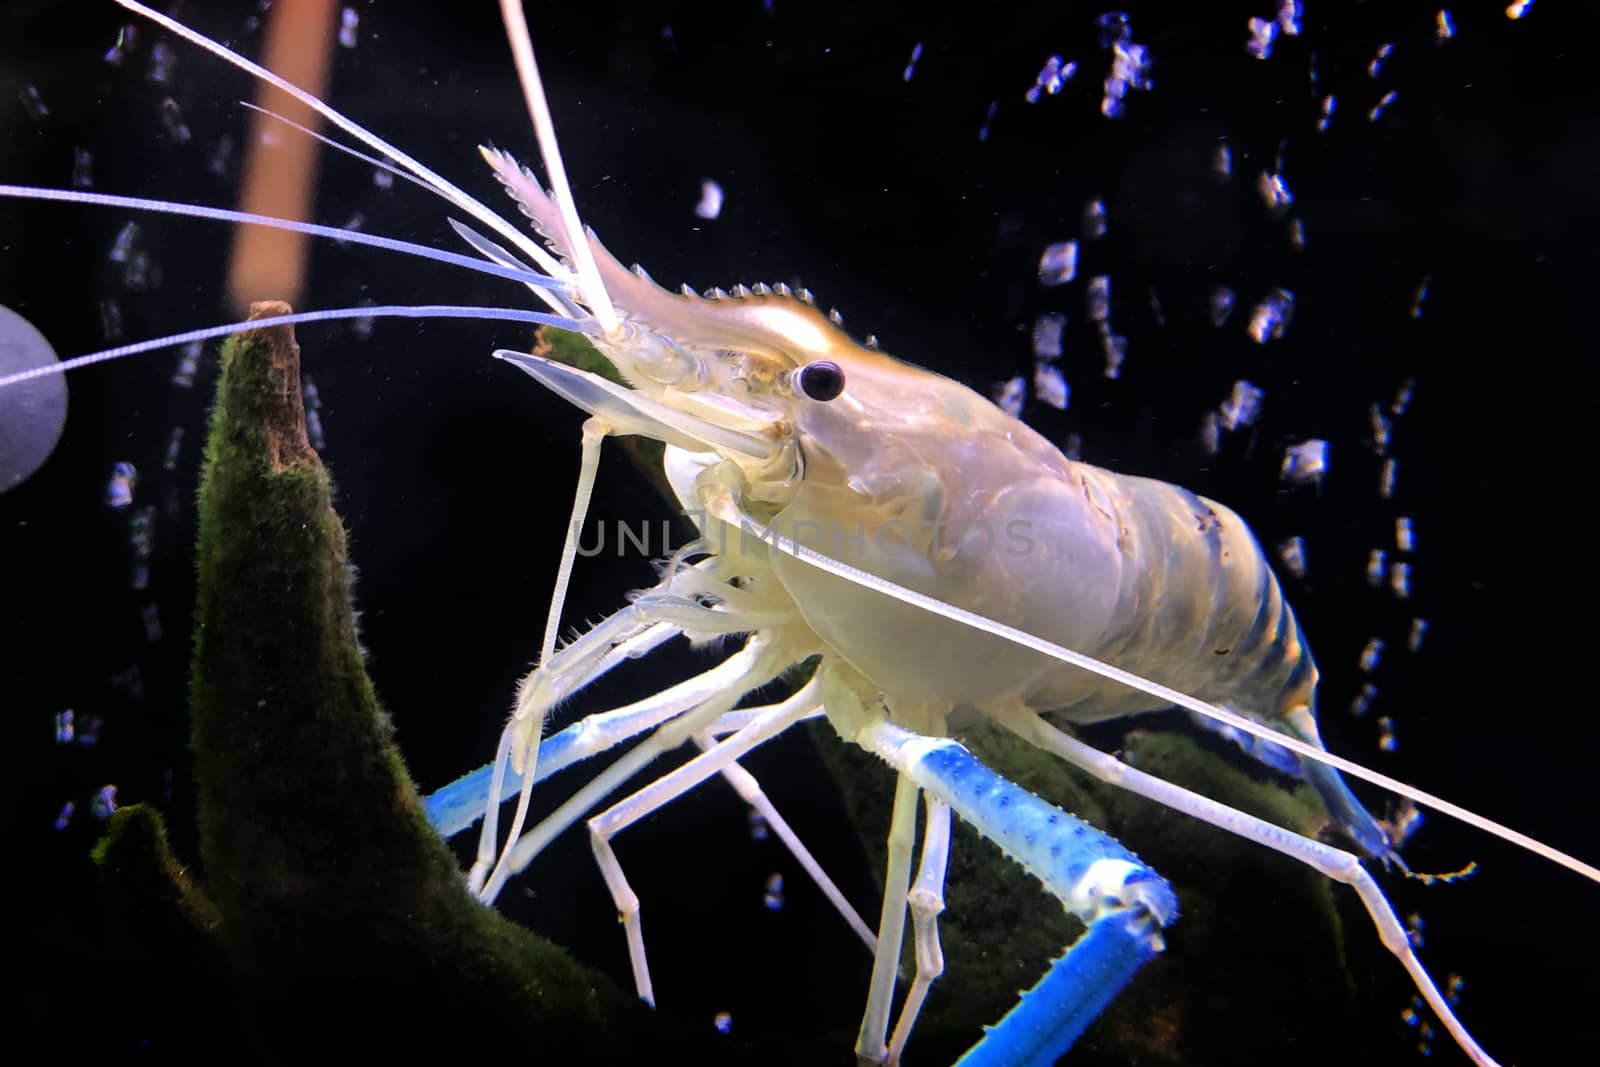 Giant freshwater prawn or giant river shrimp in tank. by pkproject